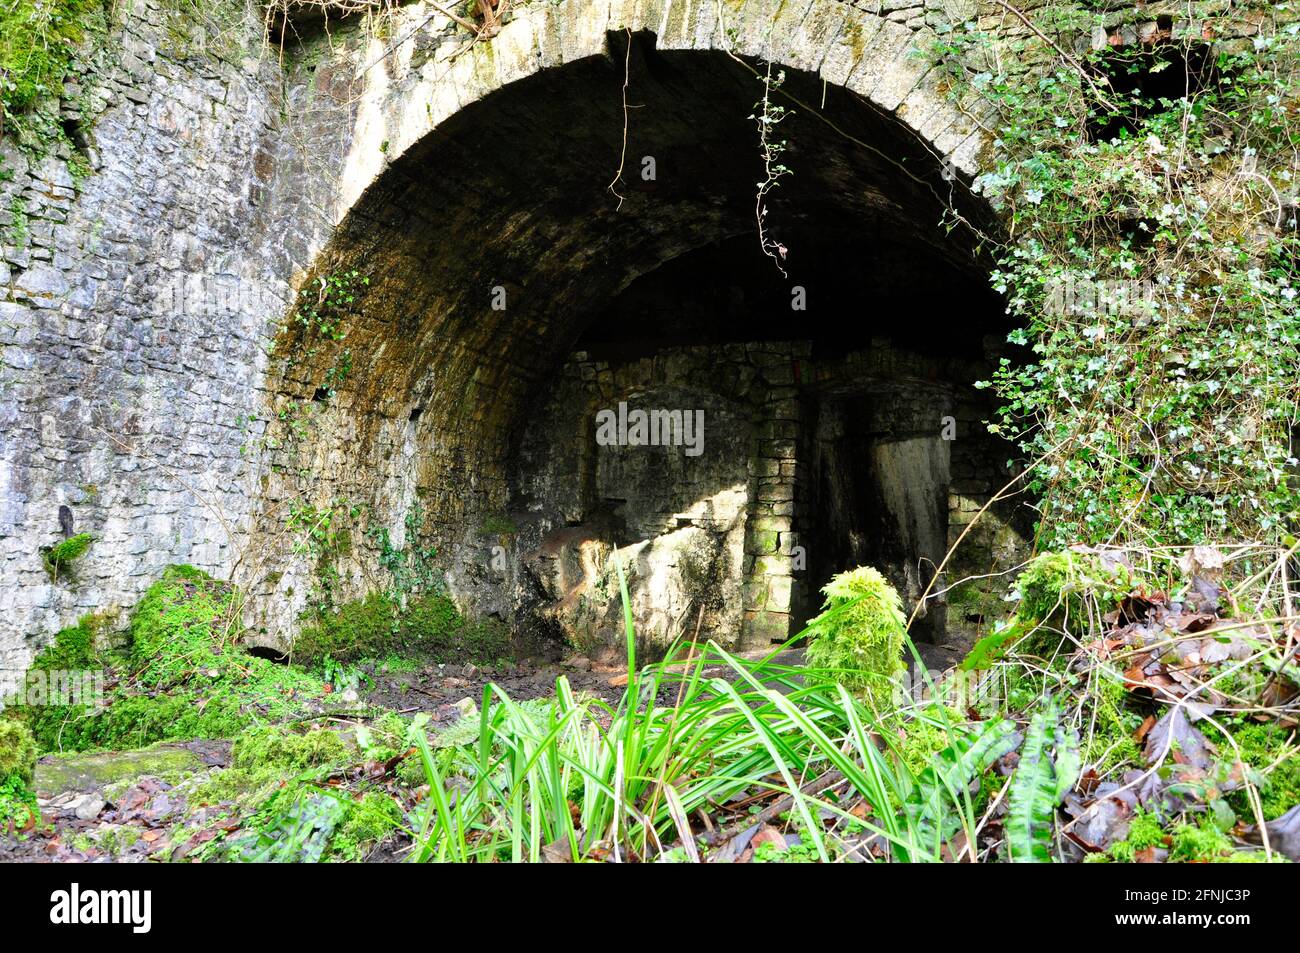 One of the trip hammer arches at the Old Iron Works, Mells , Fussells' Lower Works.This is a biological Site of Special Scientific Interest, in the Wa Stock Photo